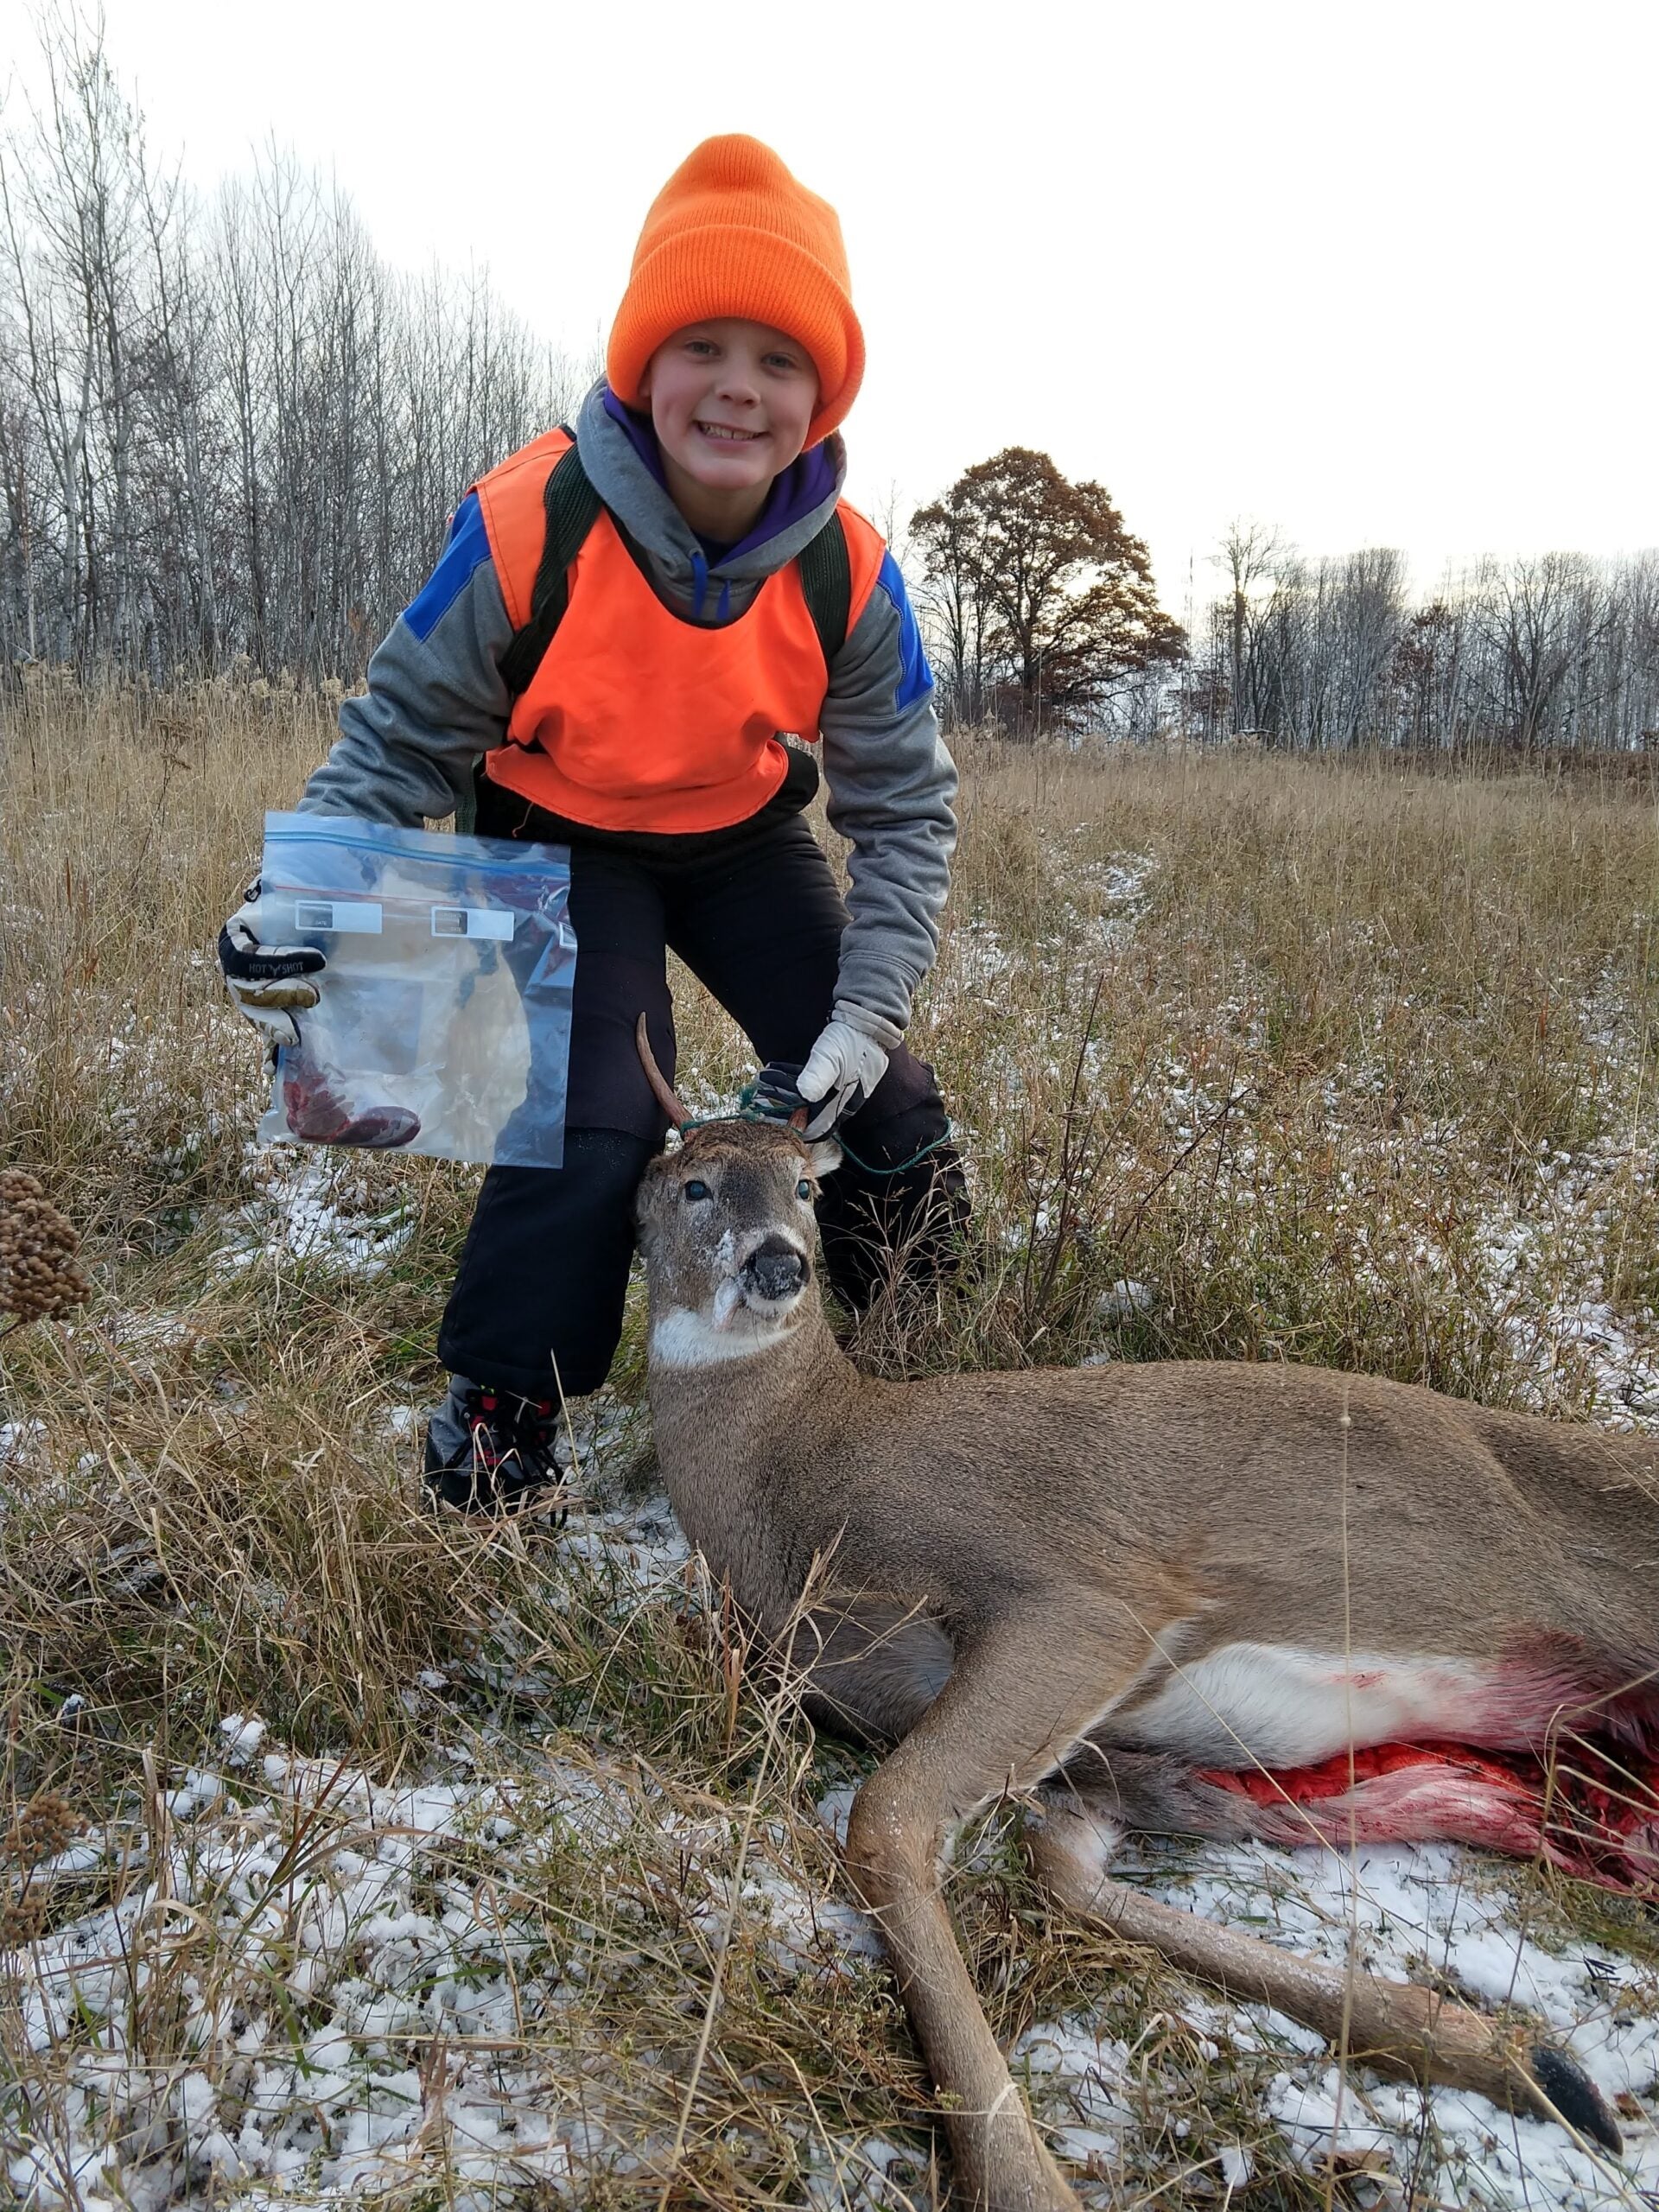 Biologists in Minnesota are finding more insecticides in white-tailed deer than ever before